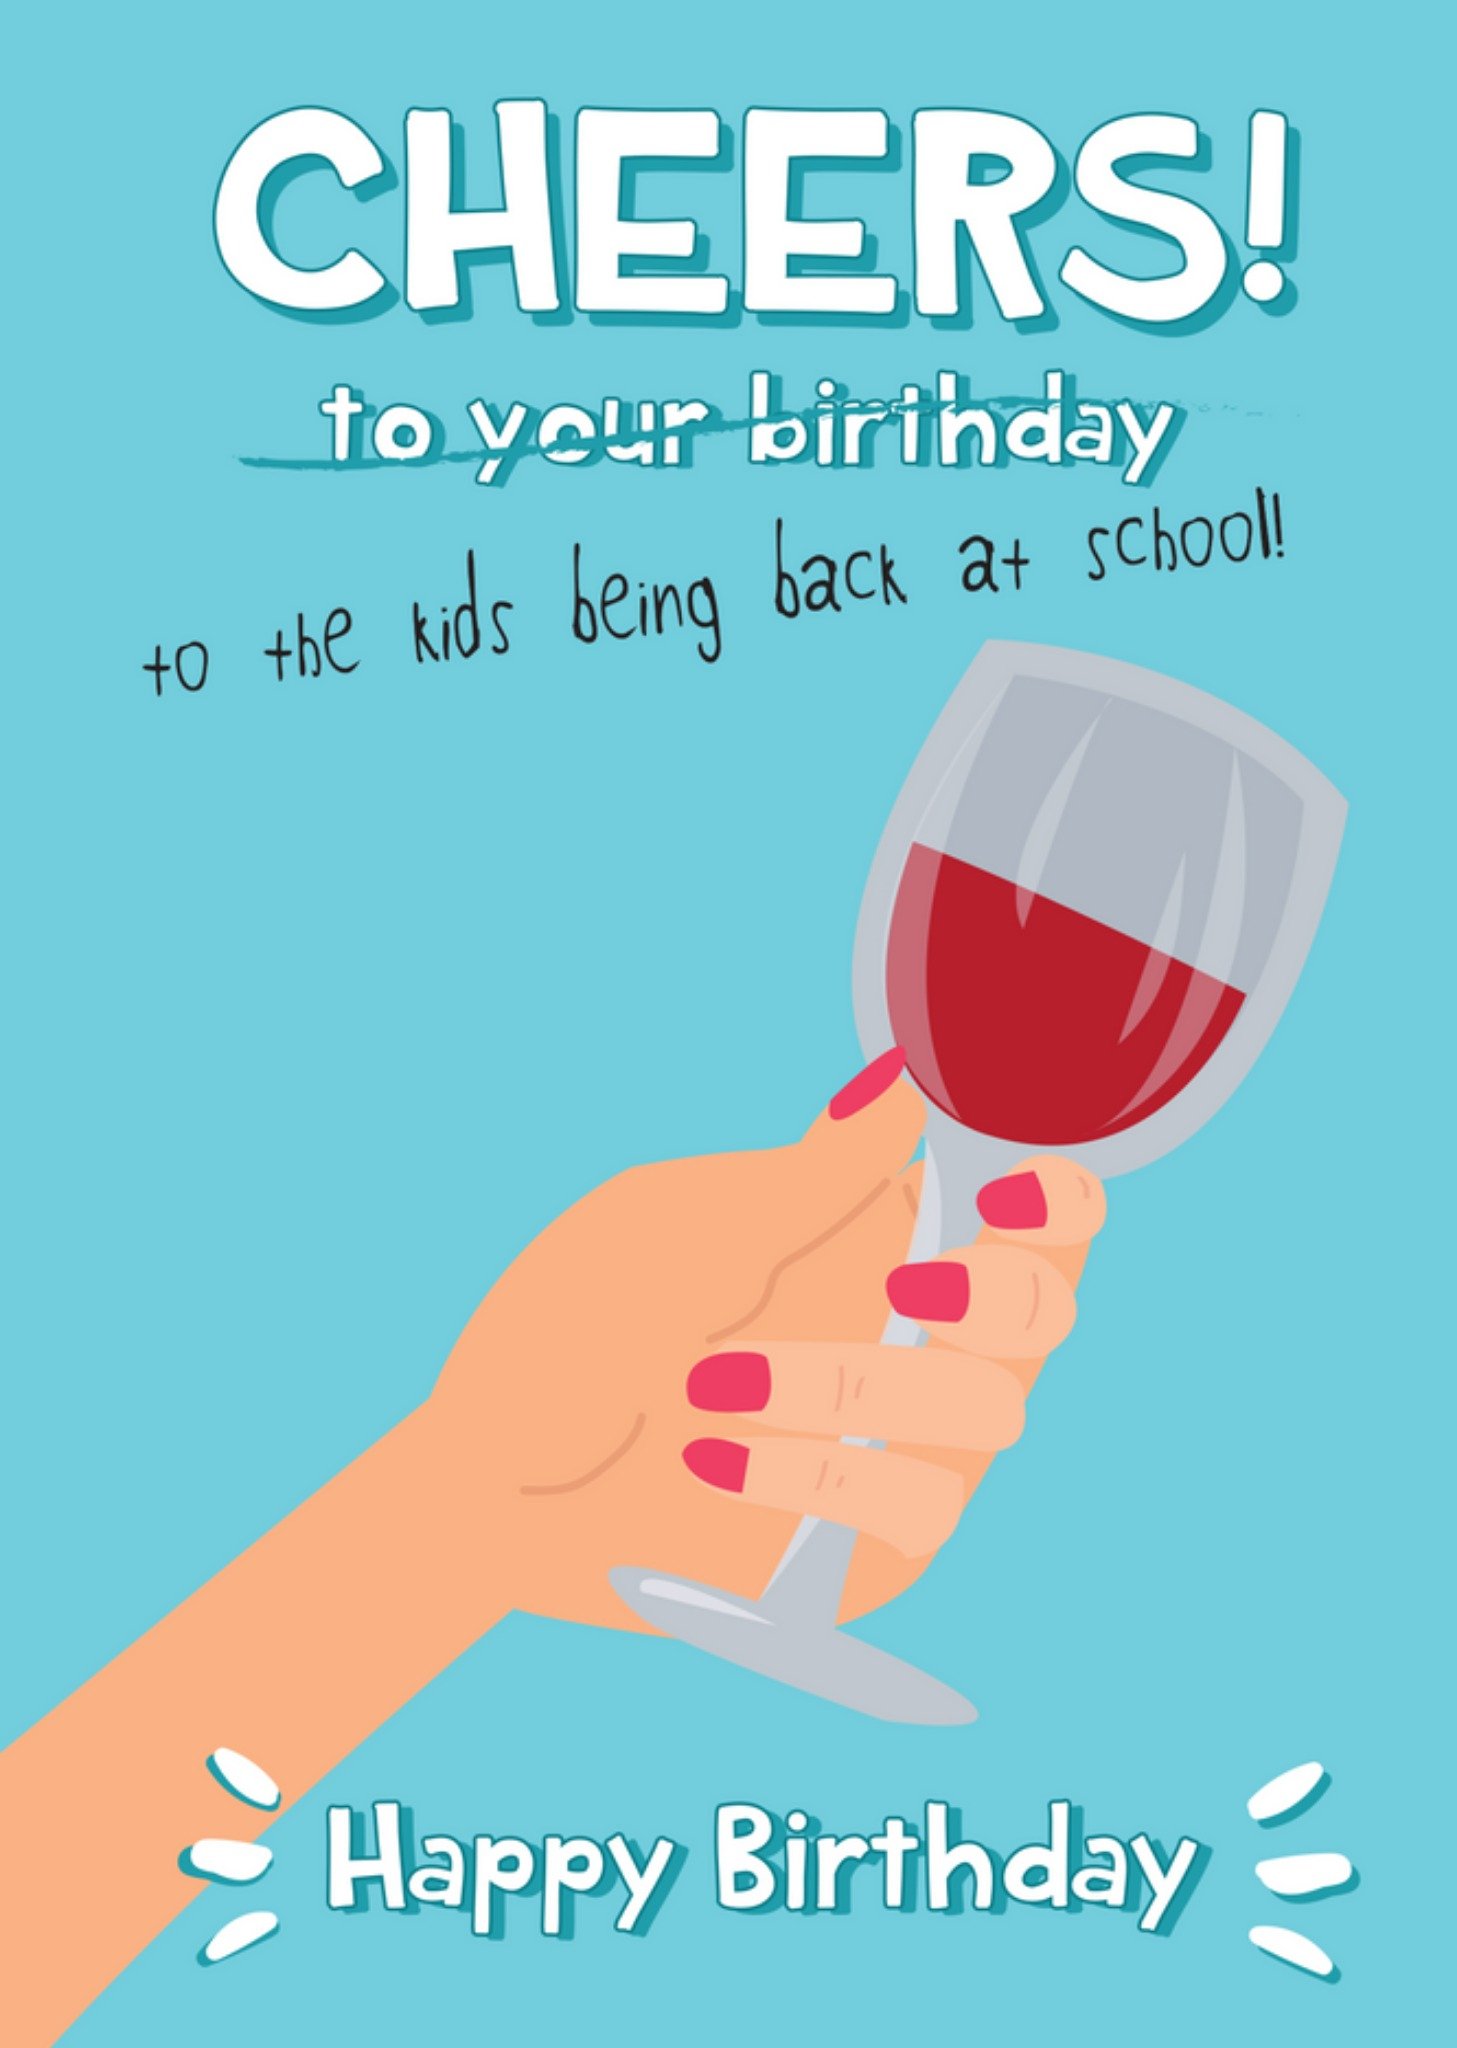 Moonpig Cheers To The Kids Being Back At School Birthday Card, Large